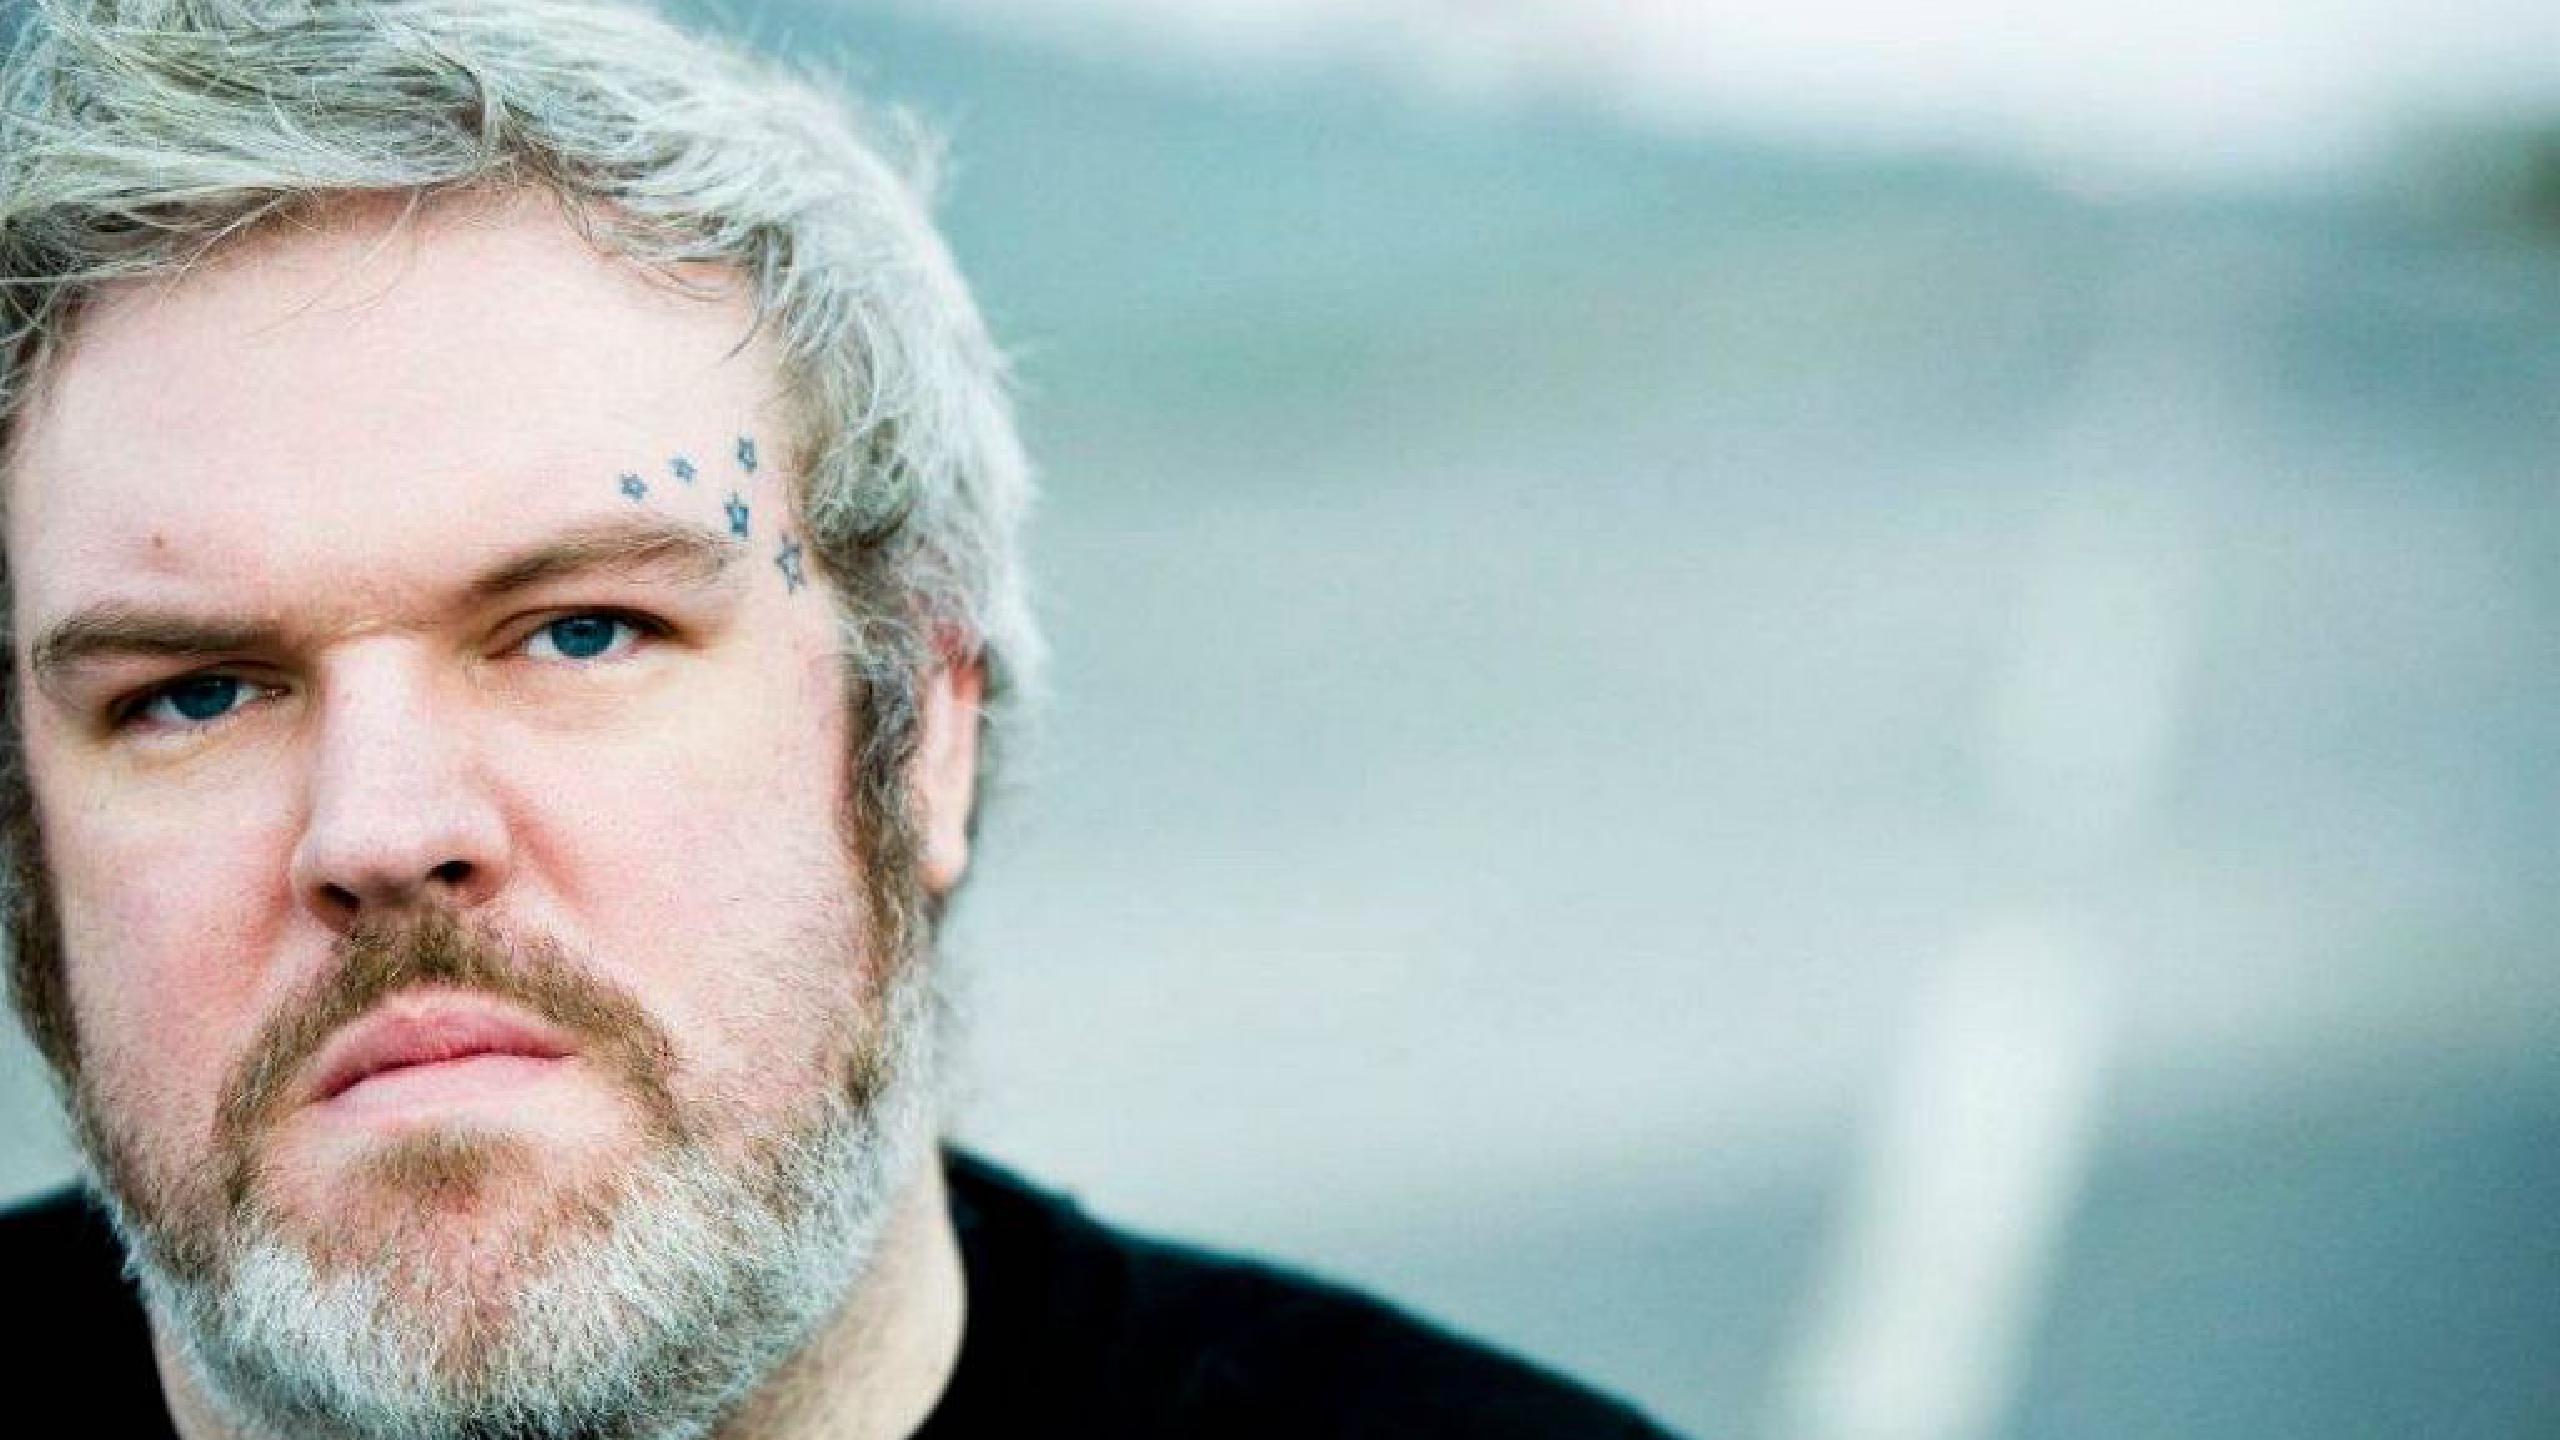 Game of Thrones: Hodor actor Kristian Nairn talks season 7 and DJing under  Rave of Thrones | The Independent | The Independent